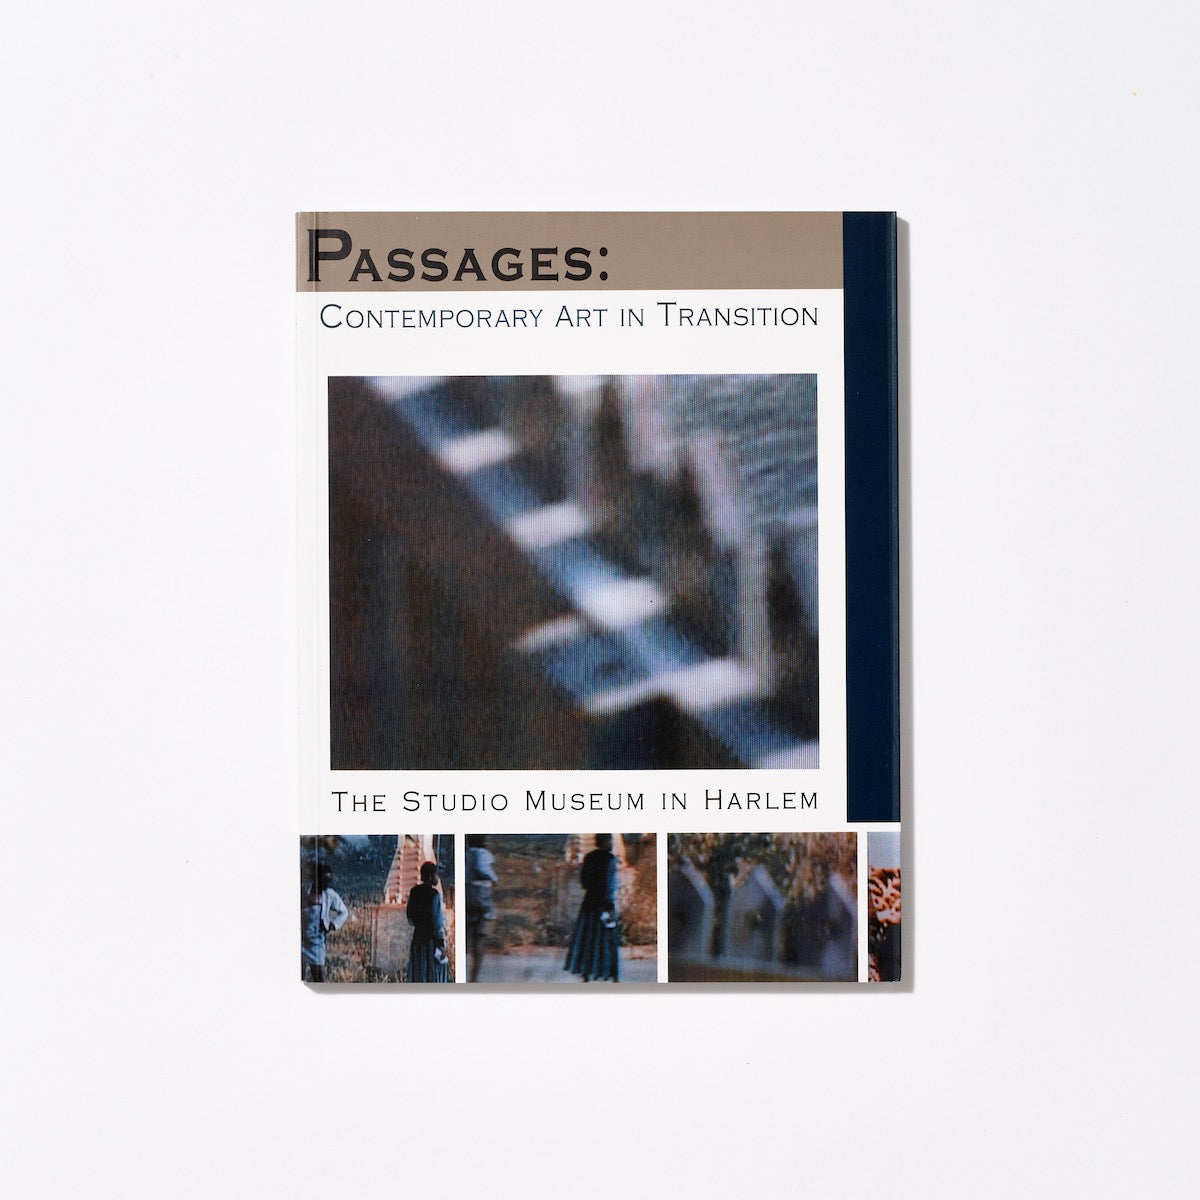 Passages: Contemporary Art in Transition